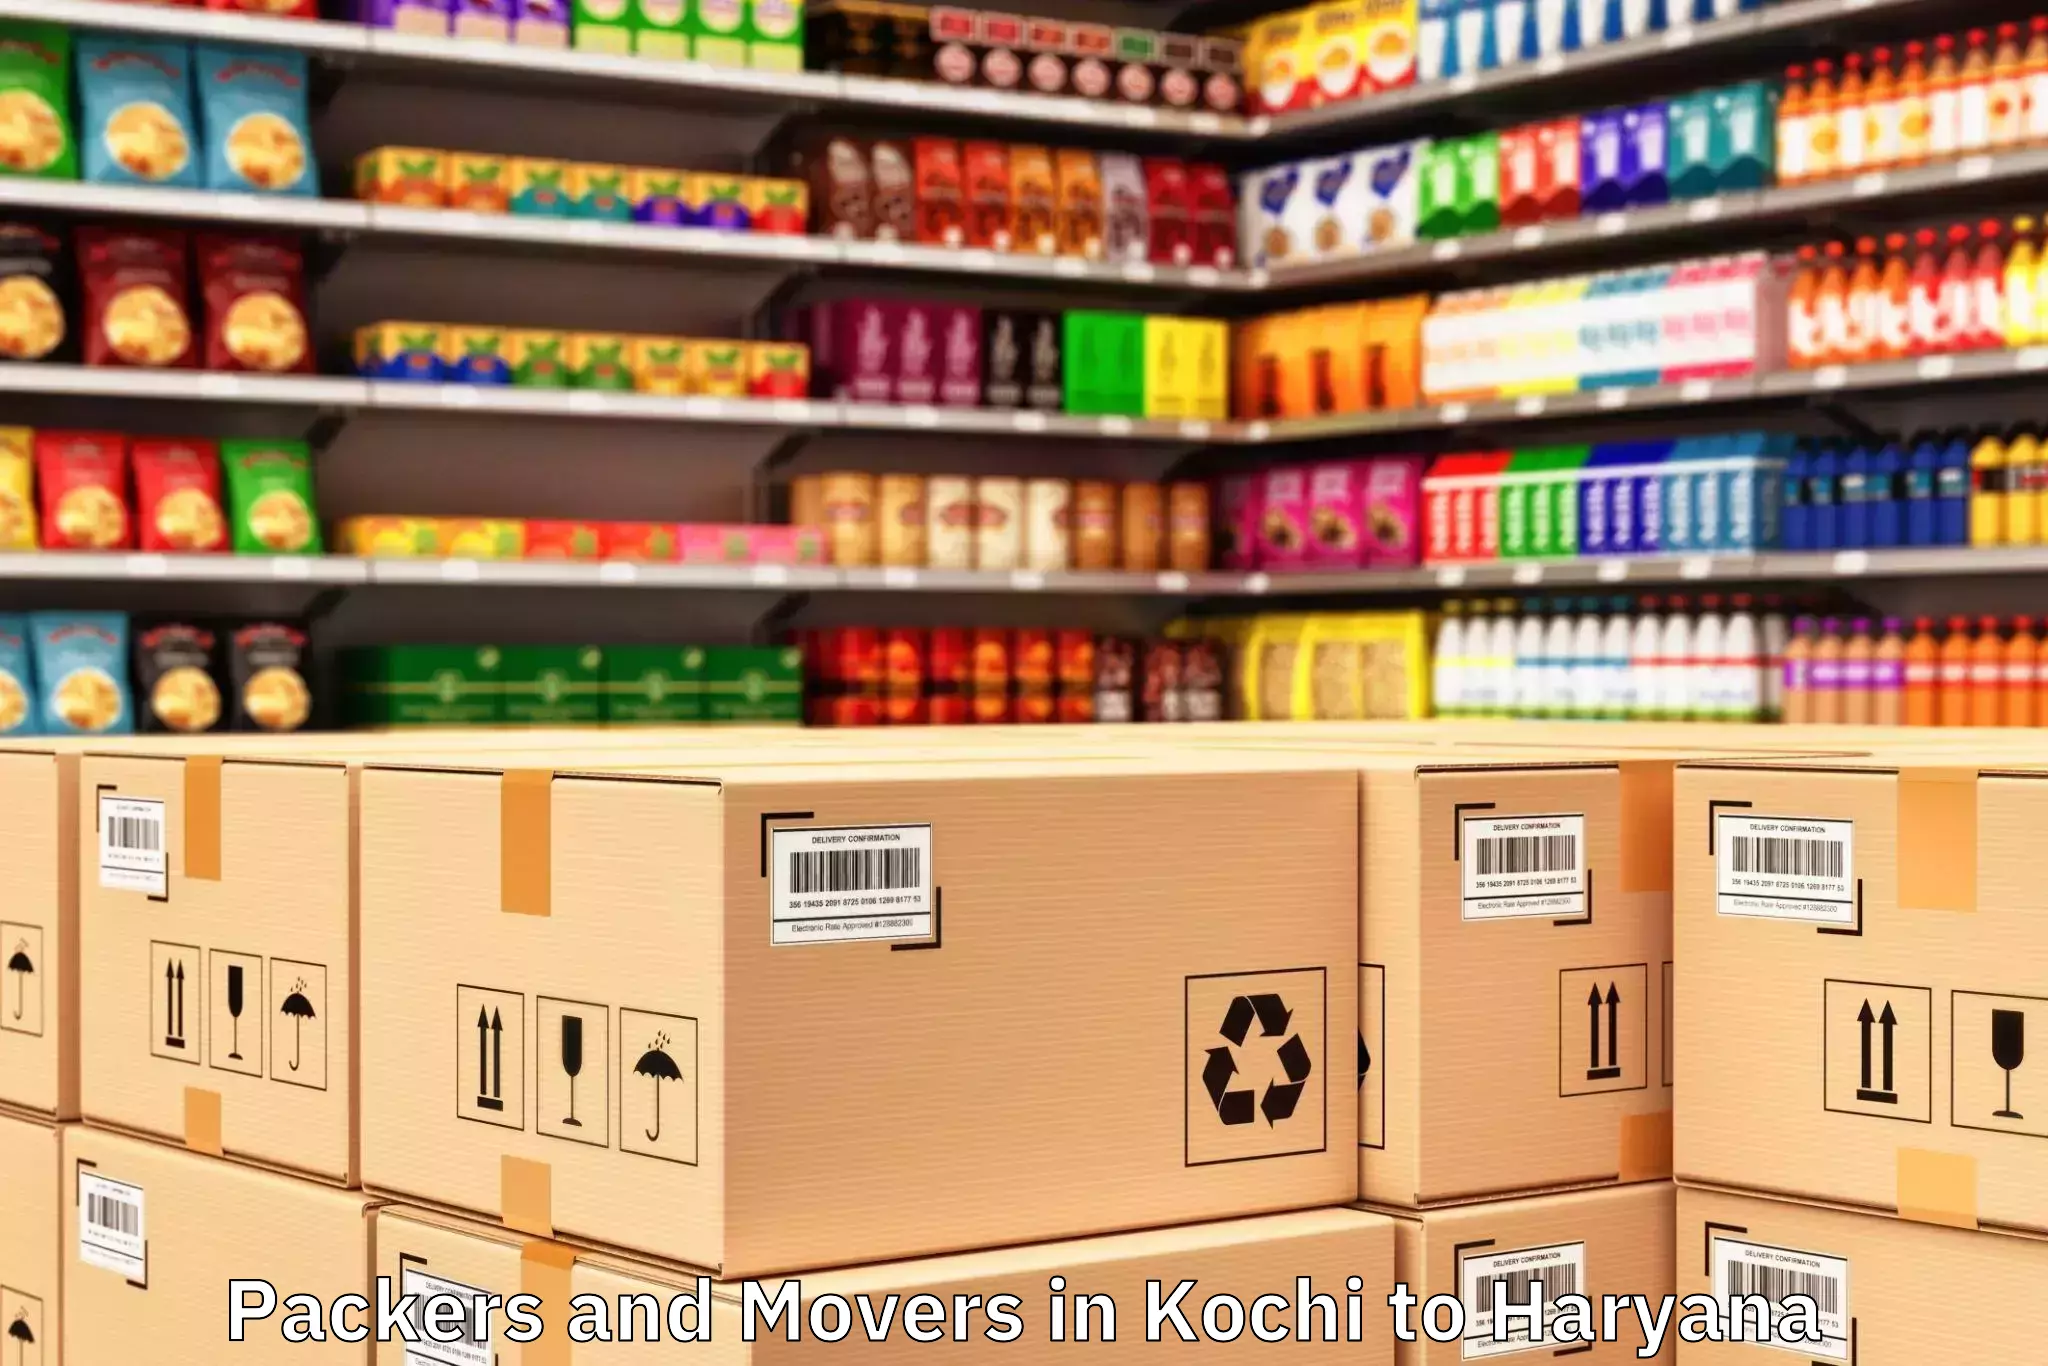 Trusted Kochi to Haryana Packers And Movers